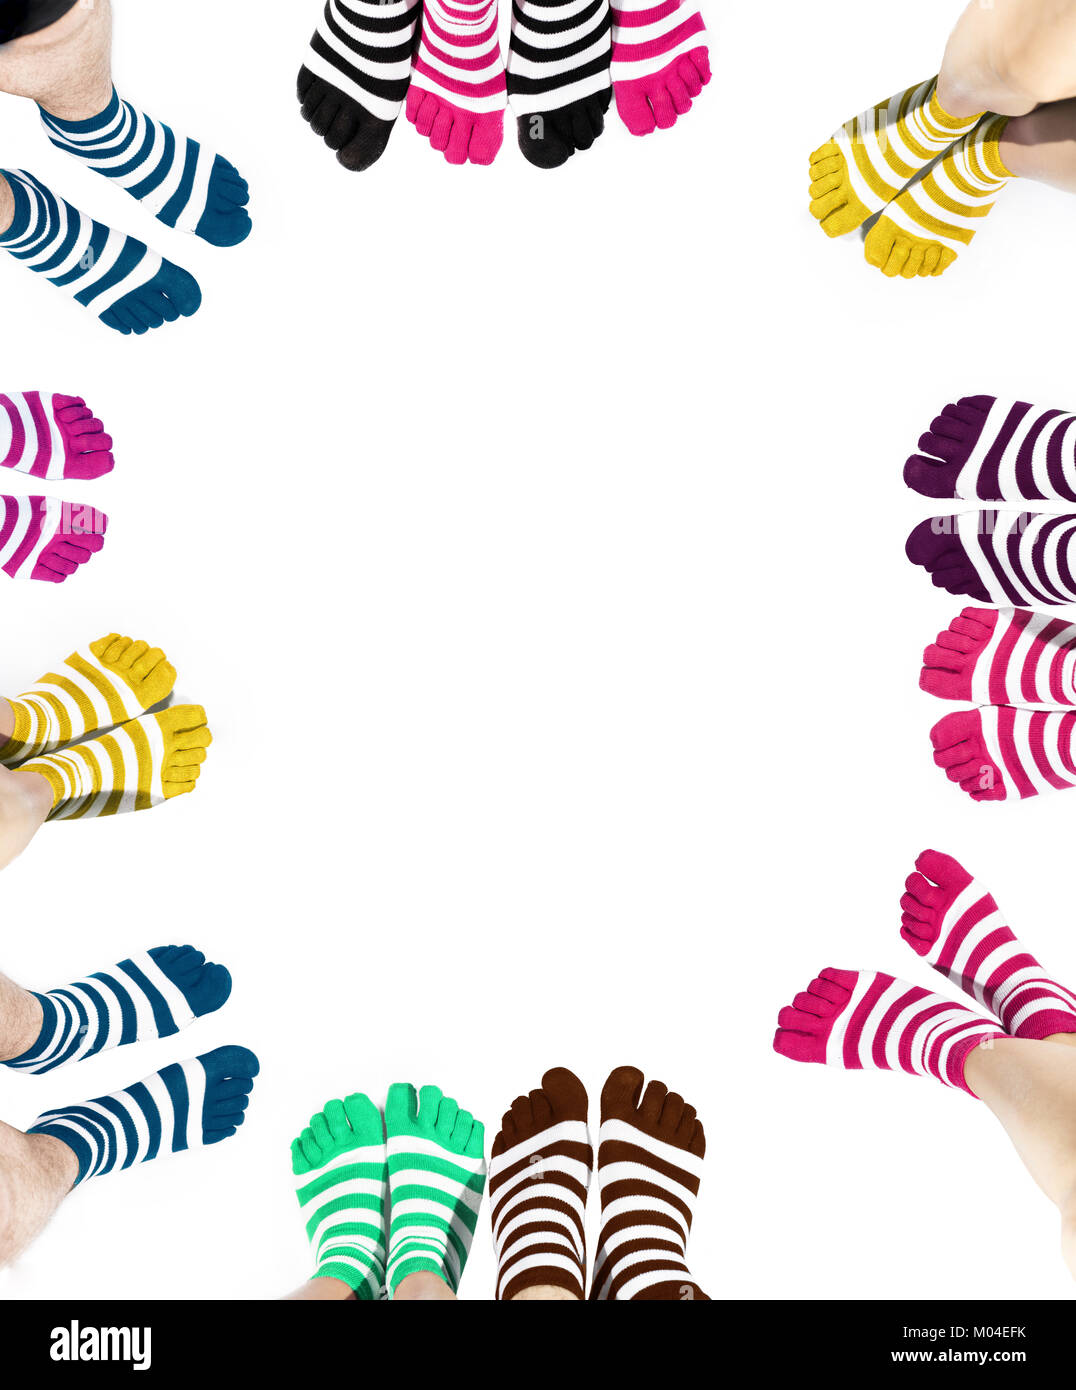 Socks Wallpaper Vector Art, Icons, and Graphics for Free Download